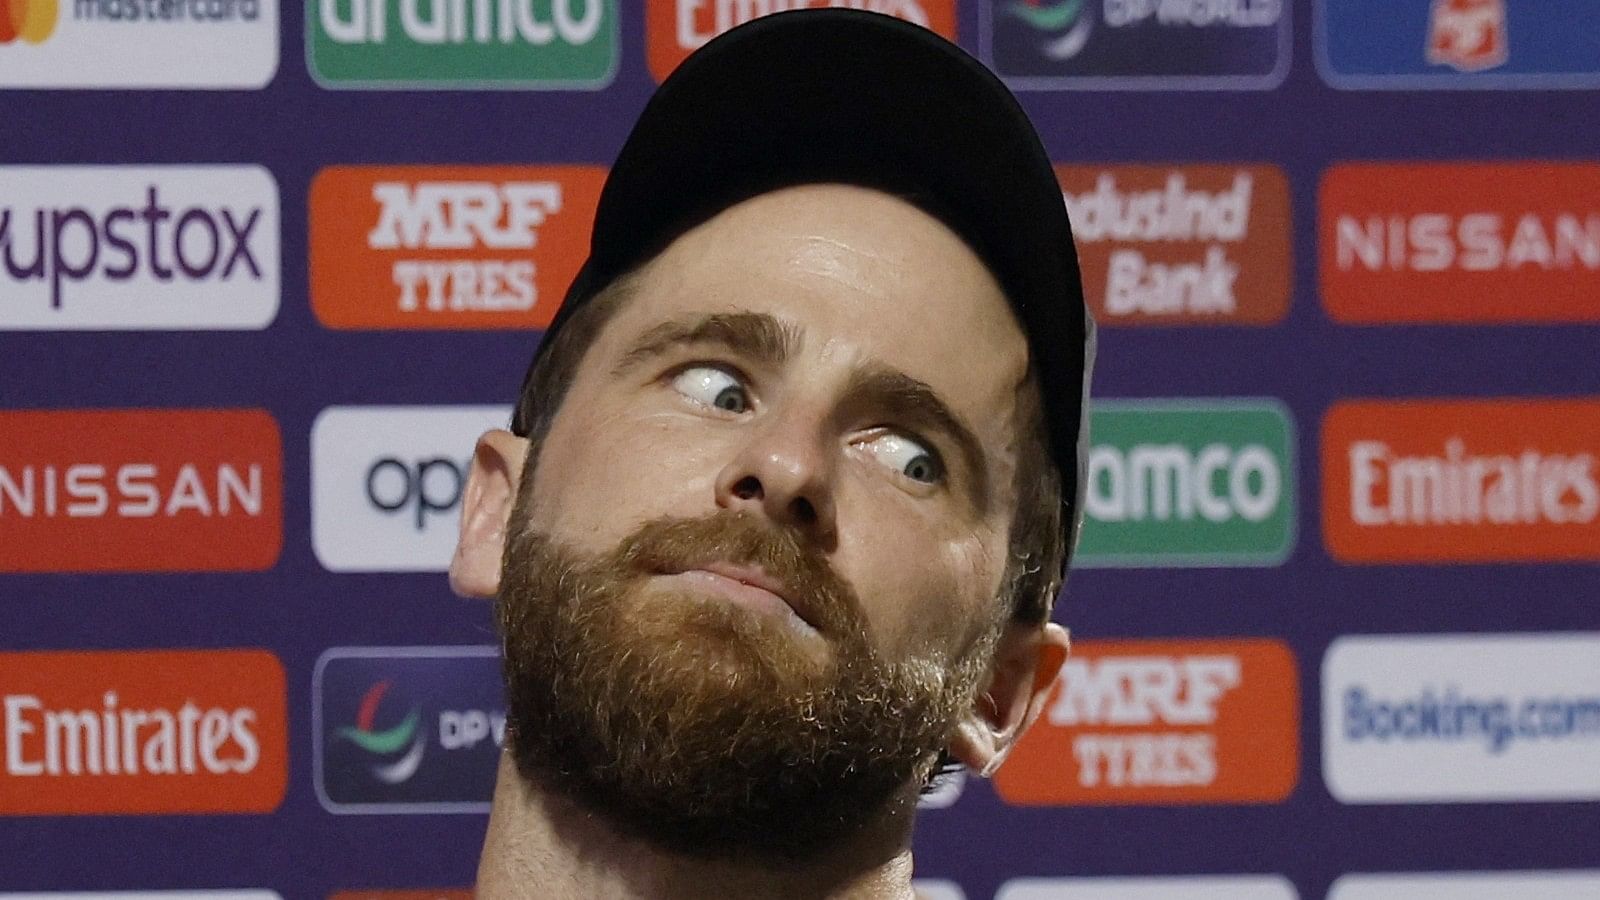 <div class="paragraphs"><p>The usually light-hearted Williamson bore a dejected look during the media interactions following New Zealand's World Cup semifinal loss to India.</p></div>